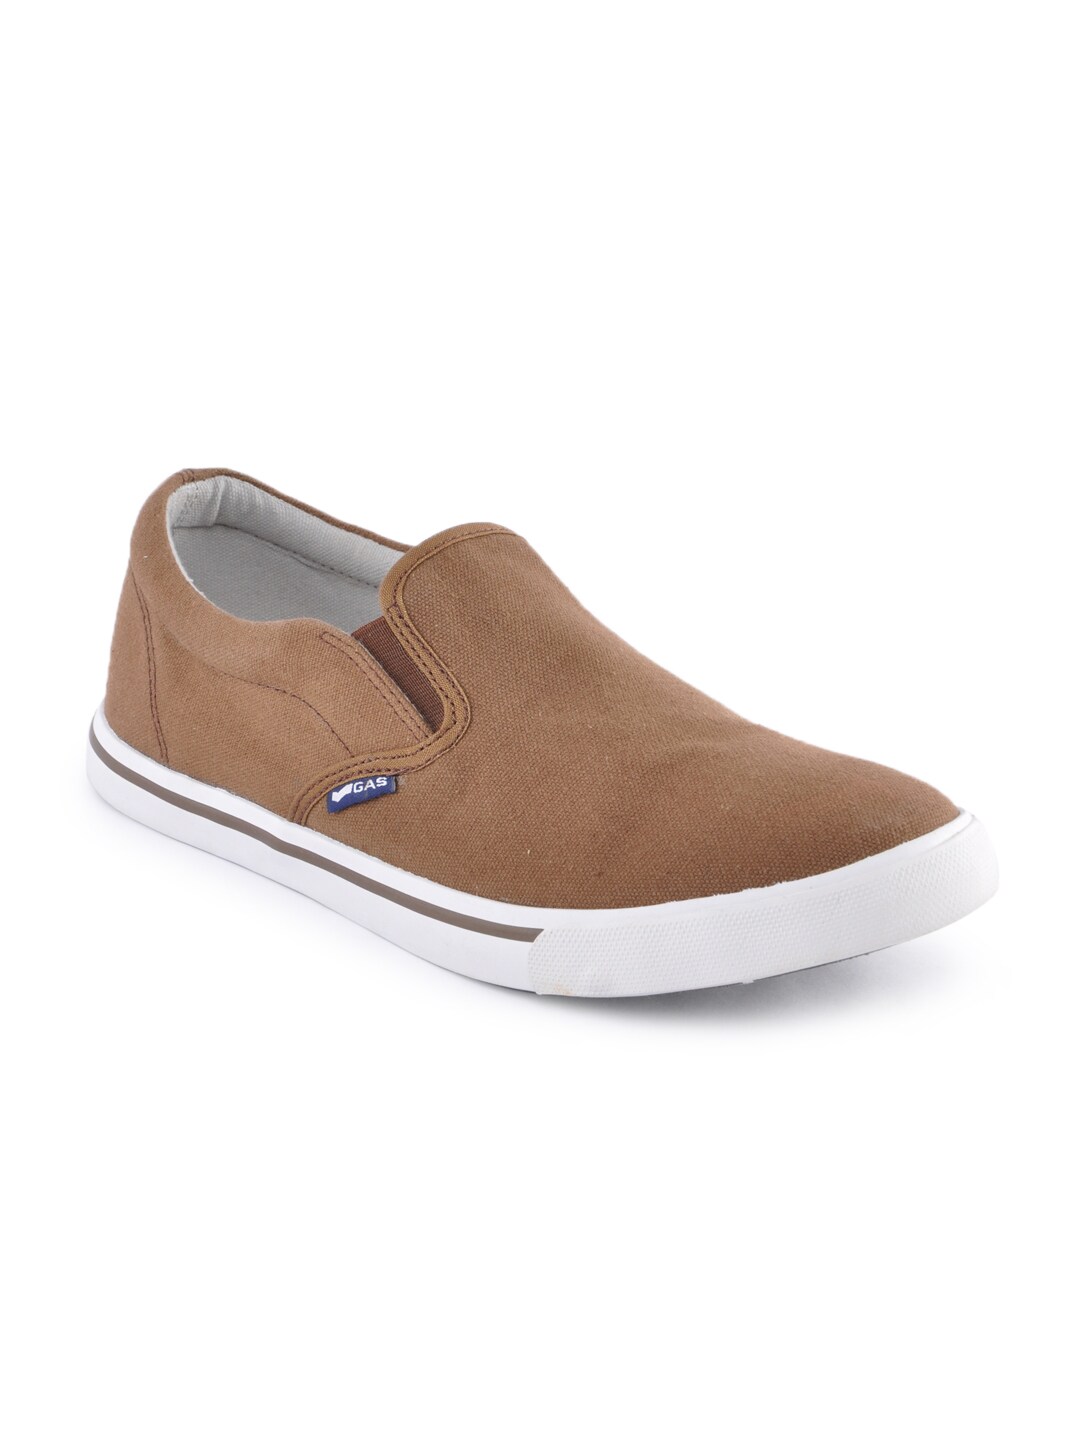 Gas Men Aishley Brown Casual Shoes